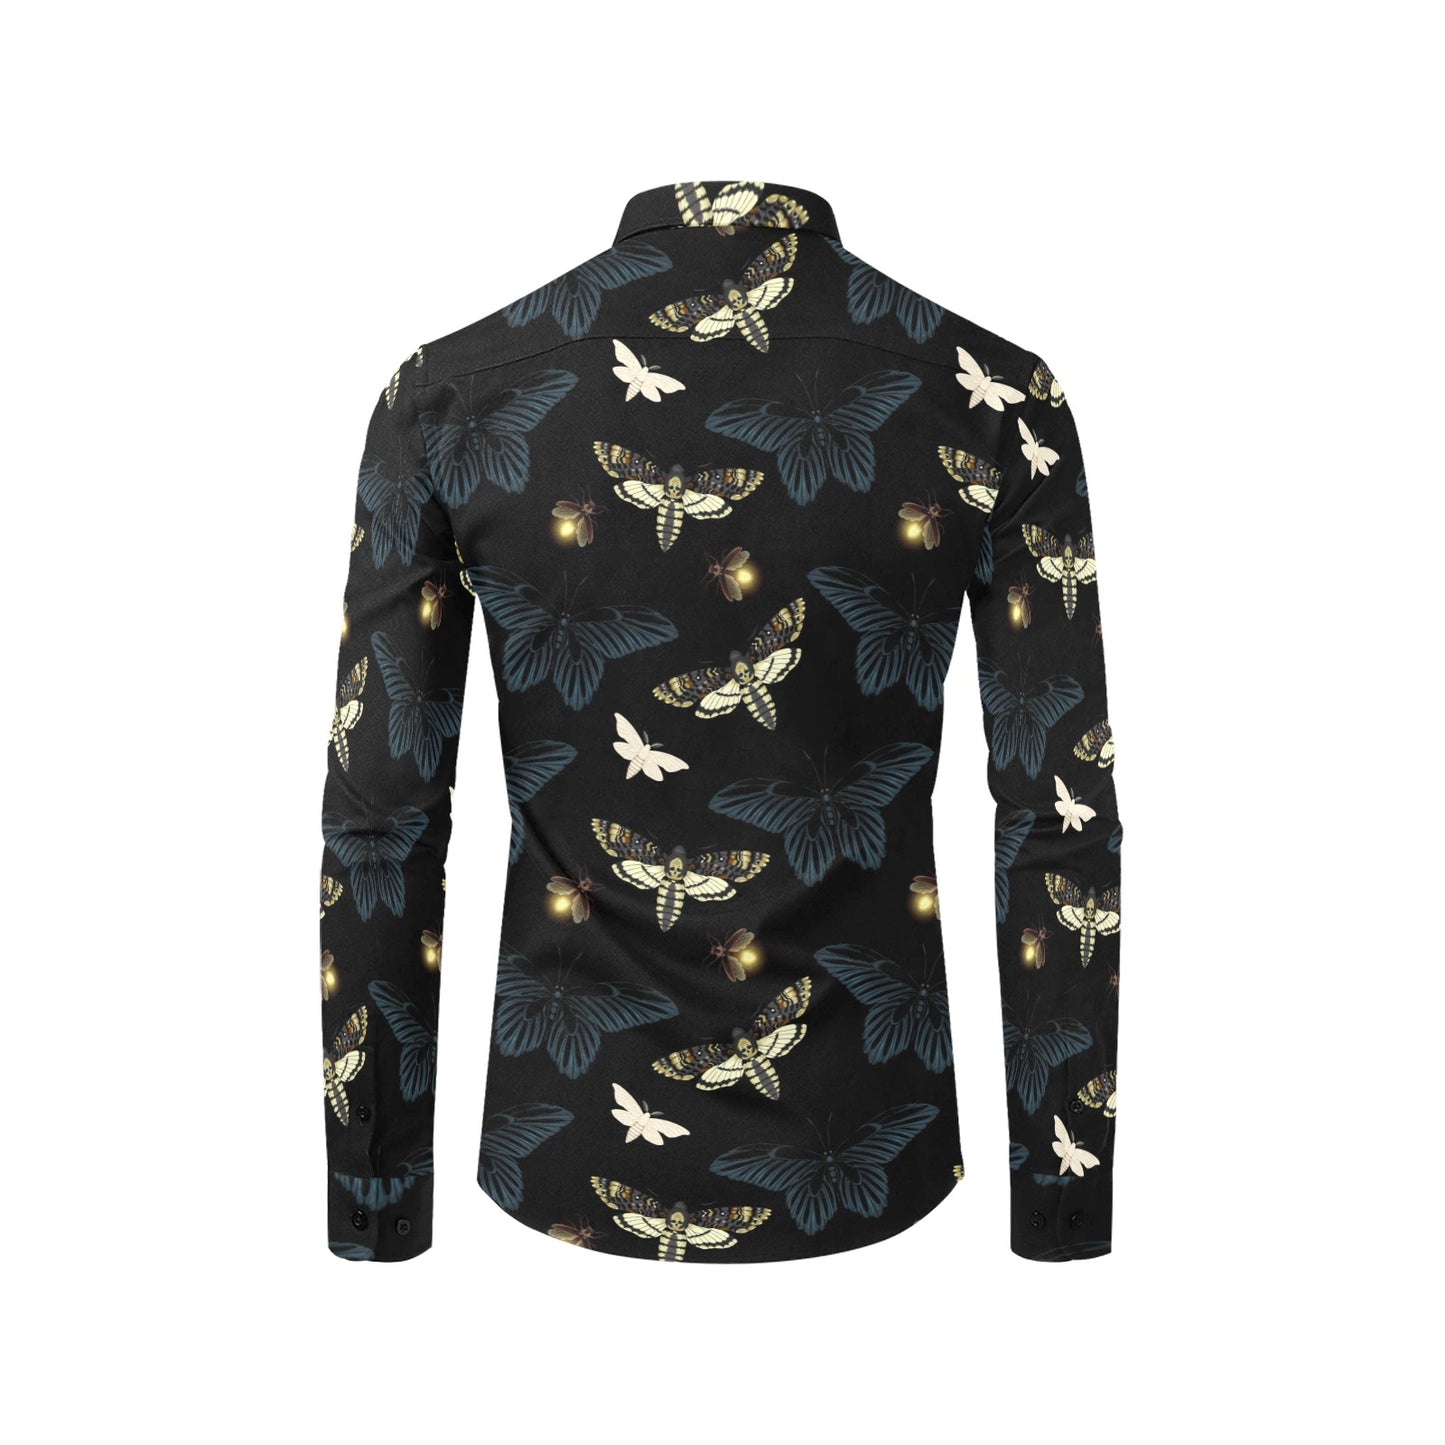 nocturnal dwellers Men's All Over Print Long Sleeve Shirt